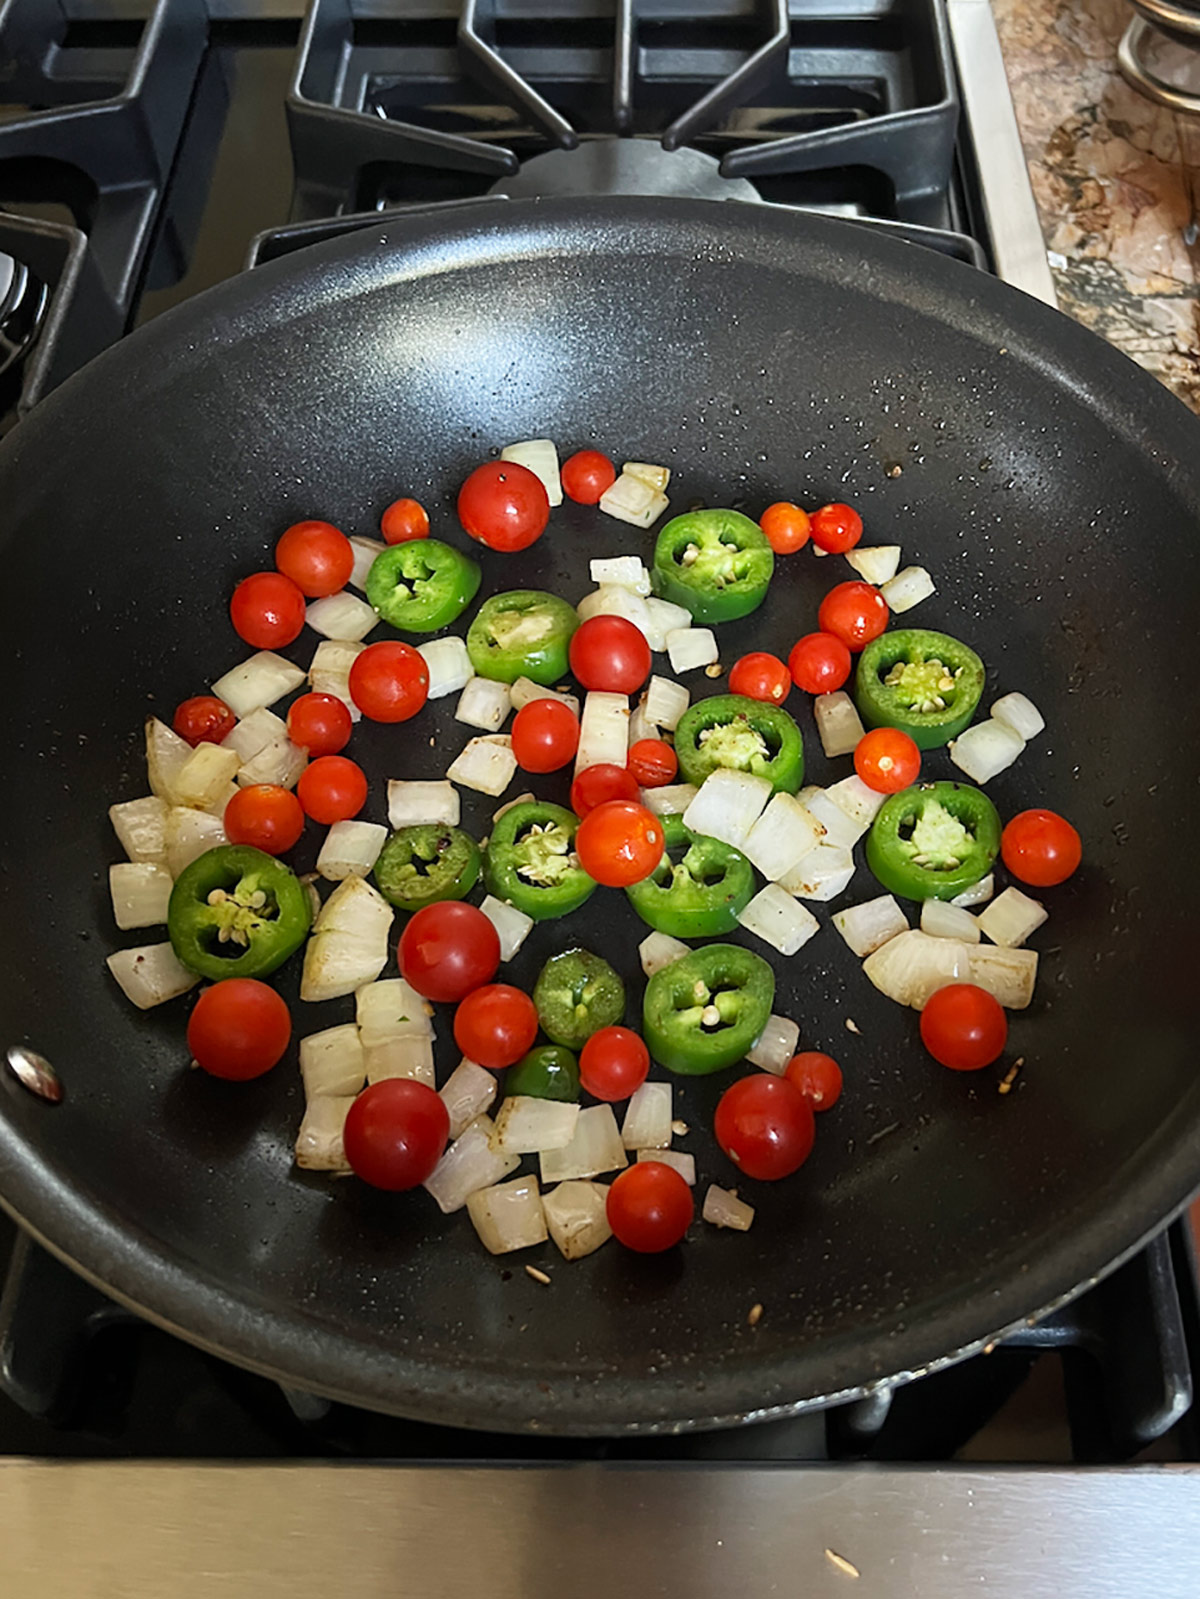 Tomatoes, onions and jalapenos in fry pan ready to place stuffed peppers on top.